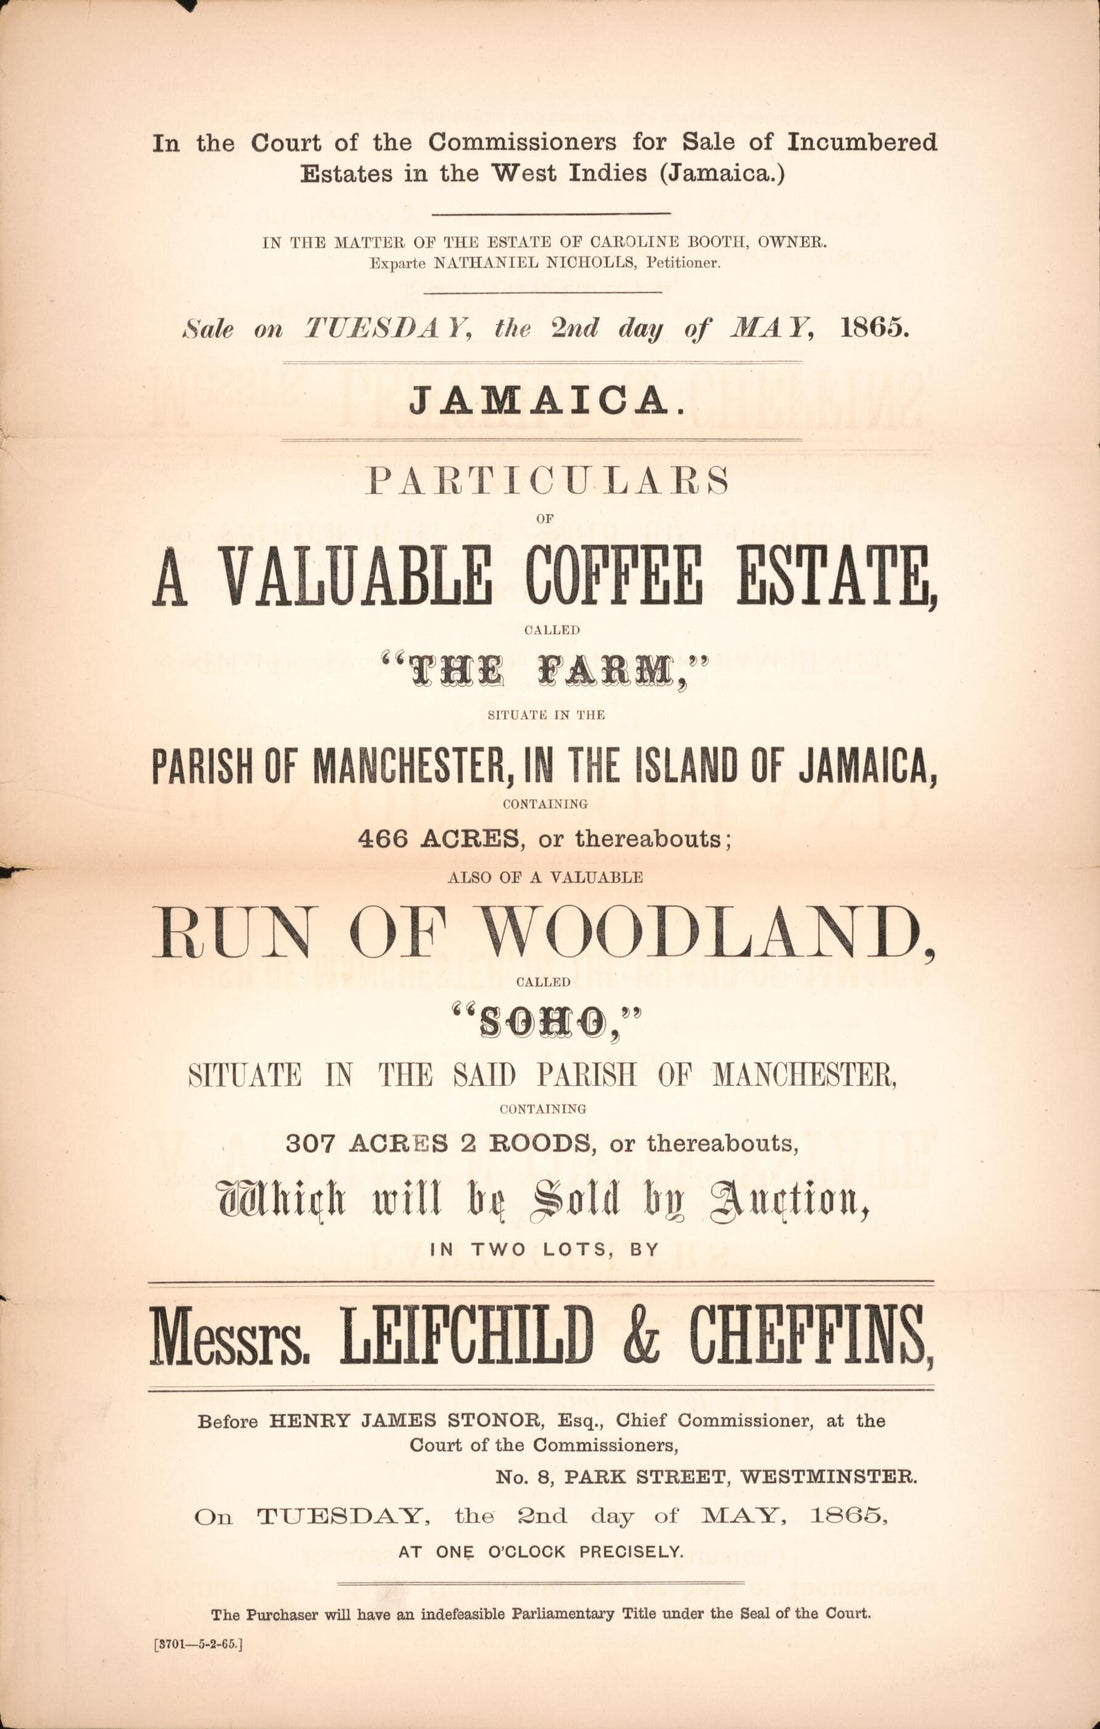 This old map of Jamaica, Particulars of a Valuable Coffee Estate : Called the Farm, Situate In the Parish of Manchester, In the Island of Jamaica, Containing 466 Acres, Or Thereabouts, Also of a Valuable Run of Woodland Called Soho, Situate In the Said P